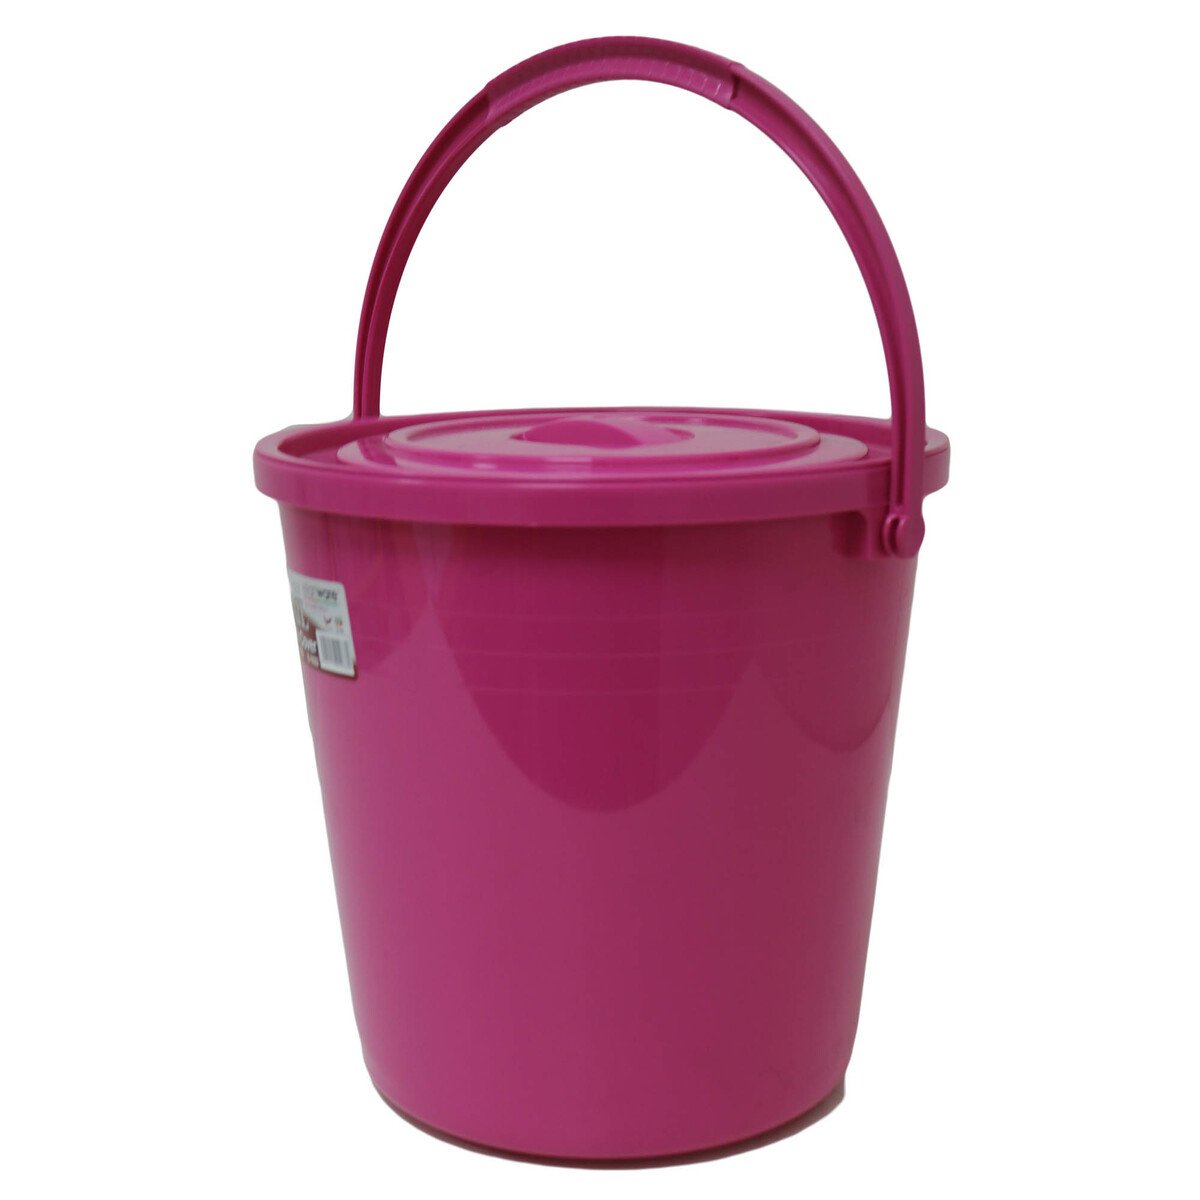 Elianware Pail With Cover 6L 1822-24